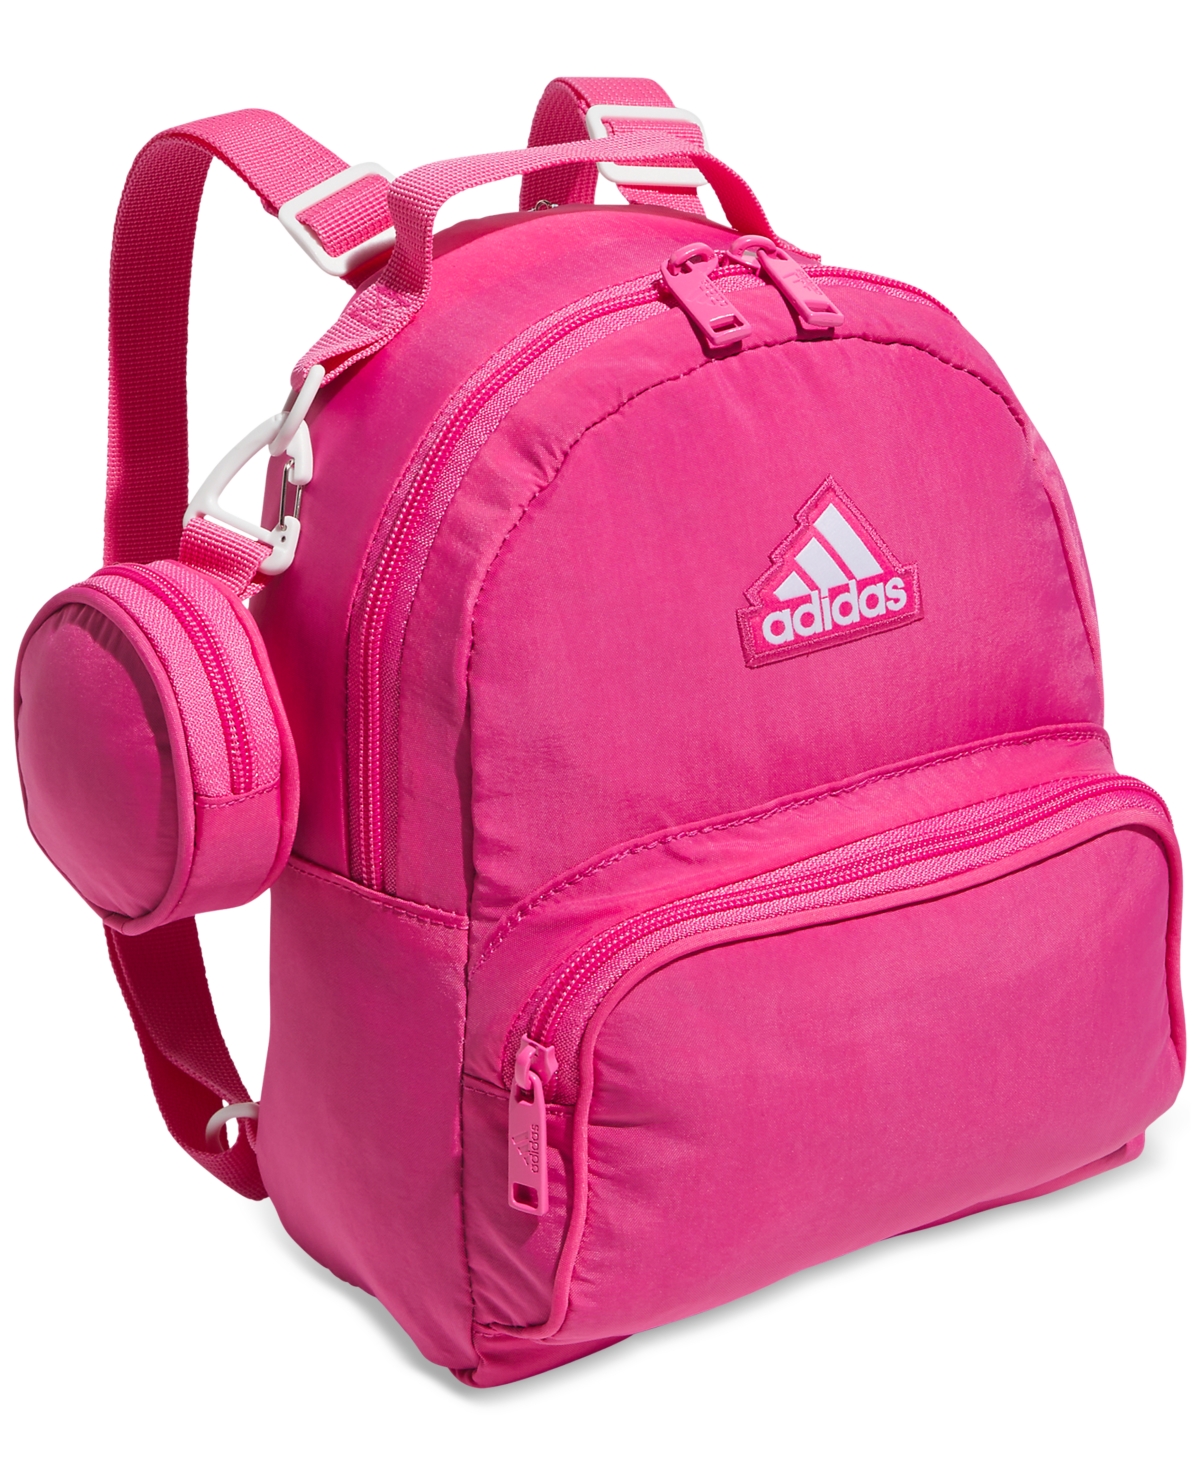 Adidas Originals Women's Must Have Mini Backpack In Pulse Magenta Pink,white